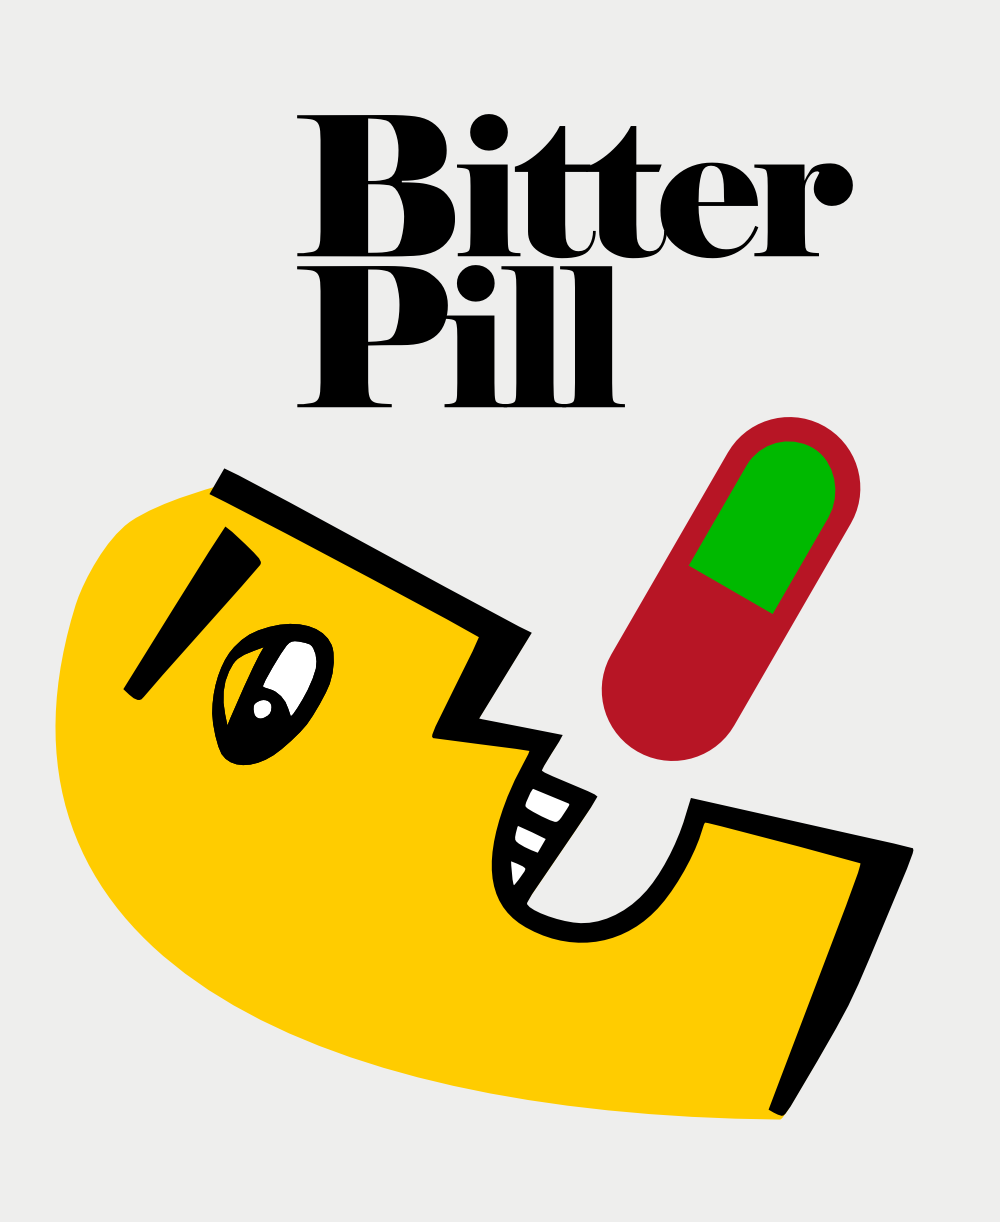 Bitter Pill - The truth can be bitterer than a sweet illusion